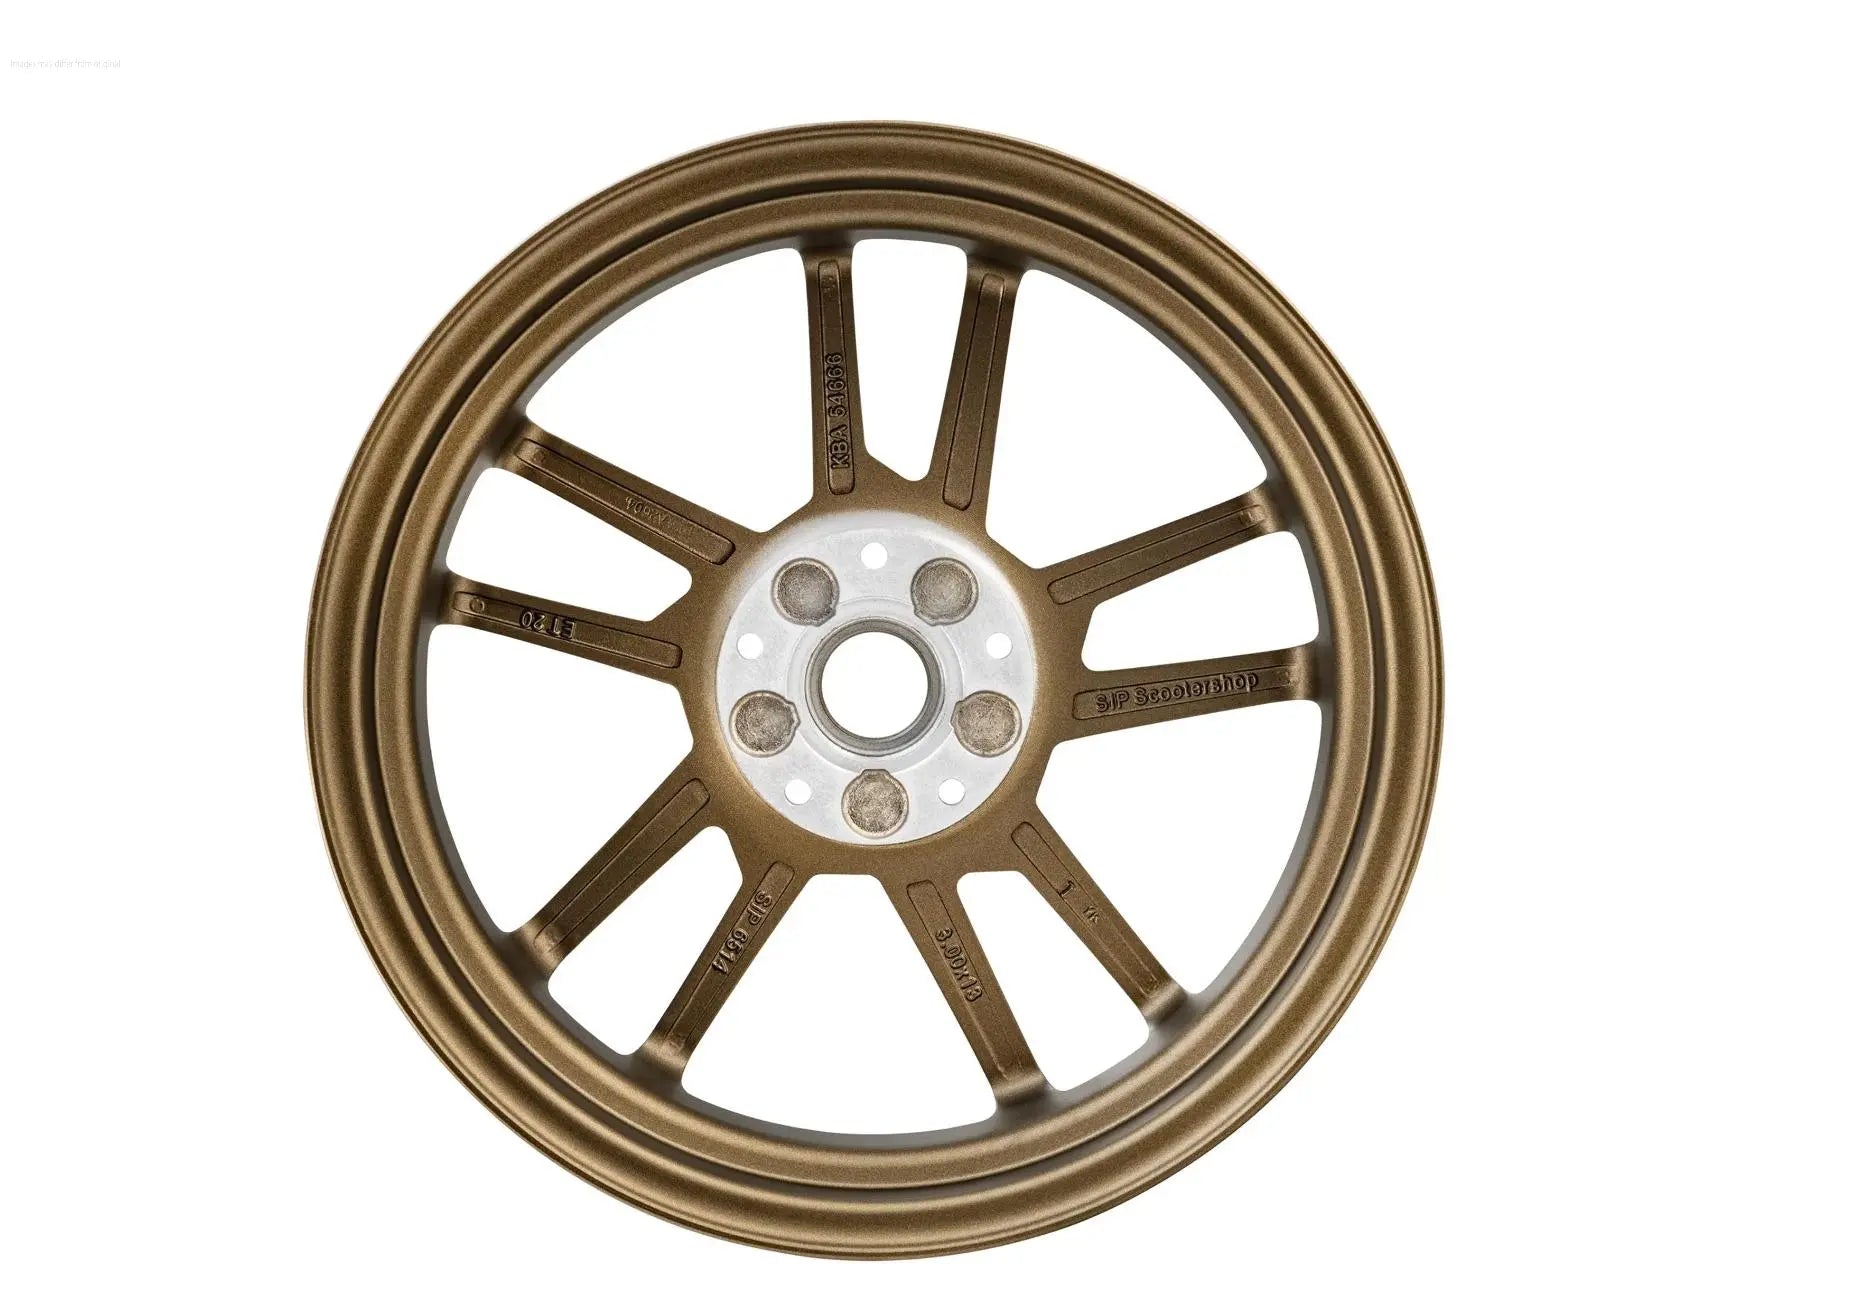 Teben all-metal authentic gts second-generation fishing wheel